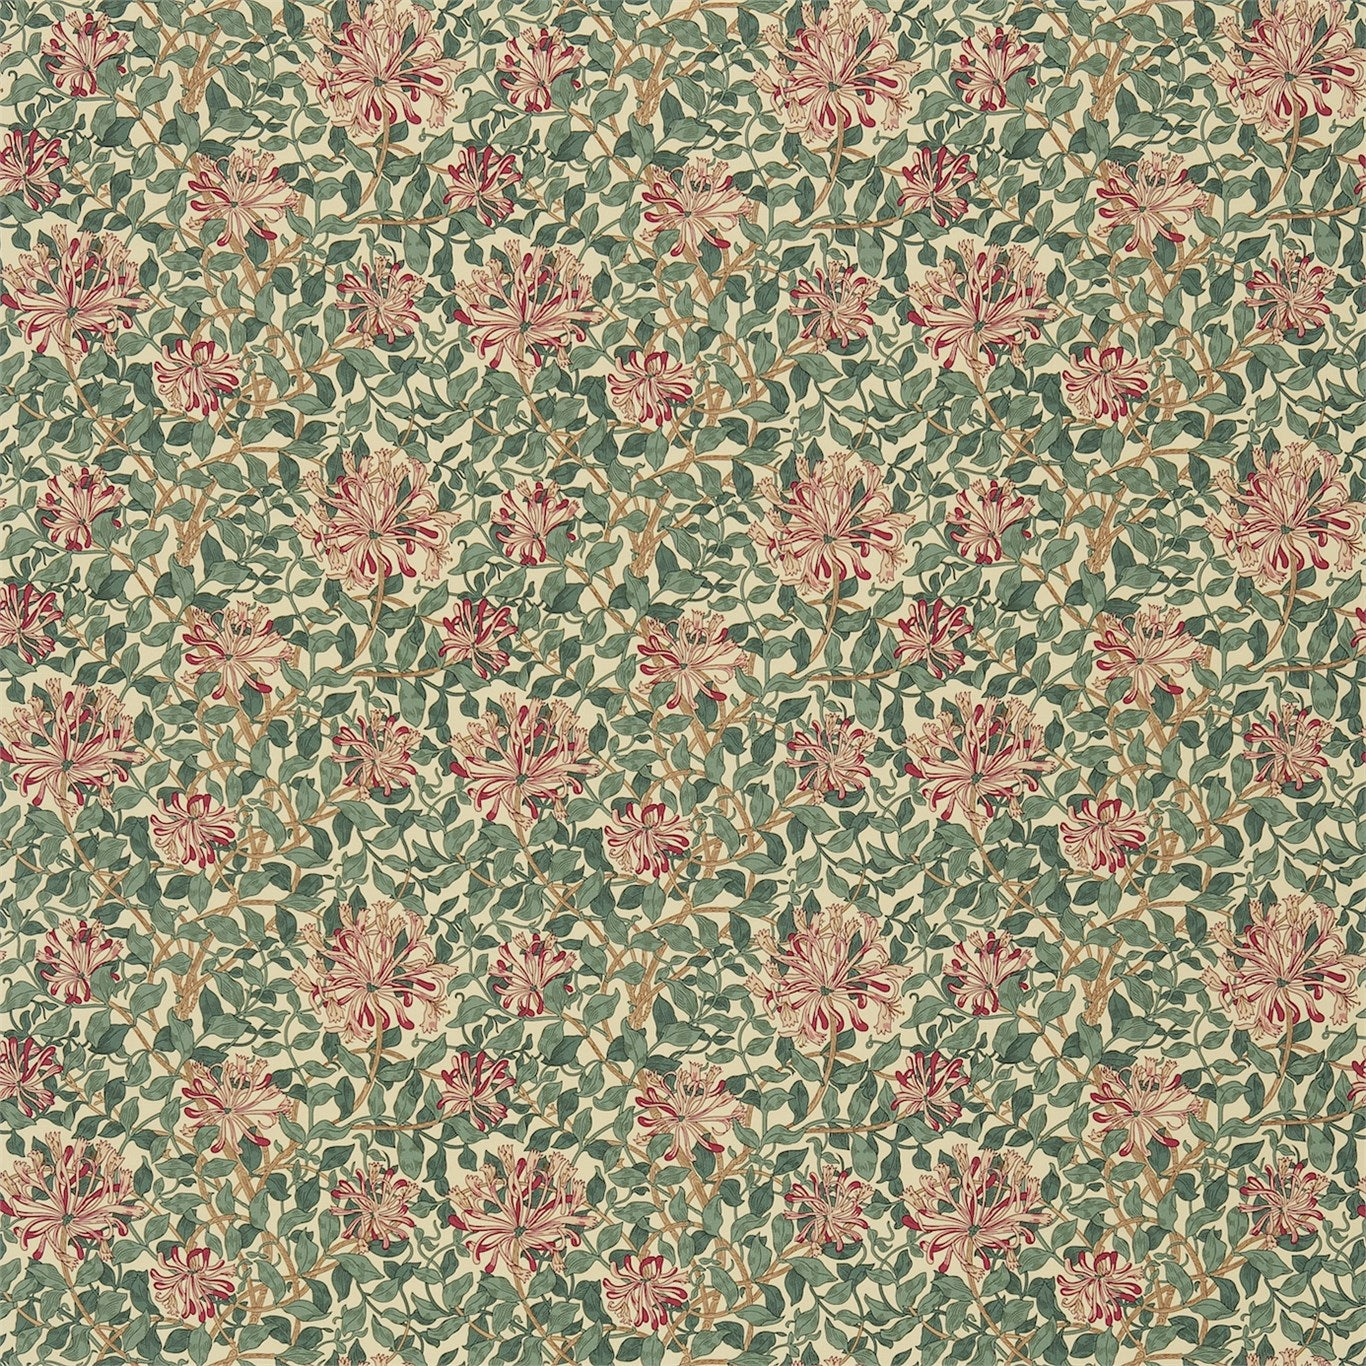 Honeysuckle Fabric by Morris & Co.